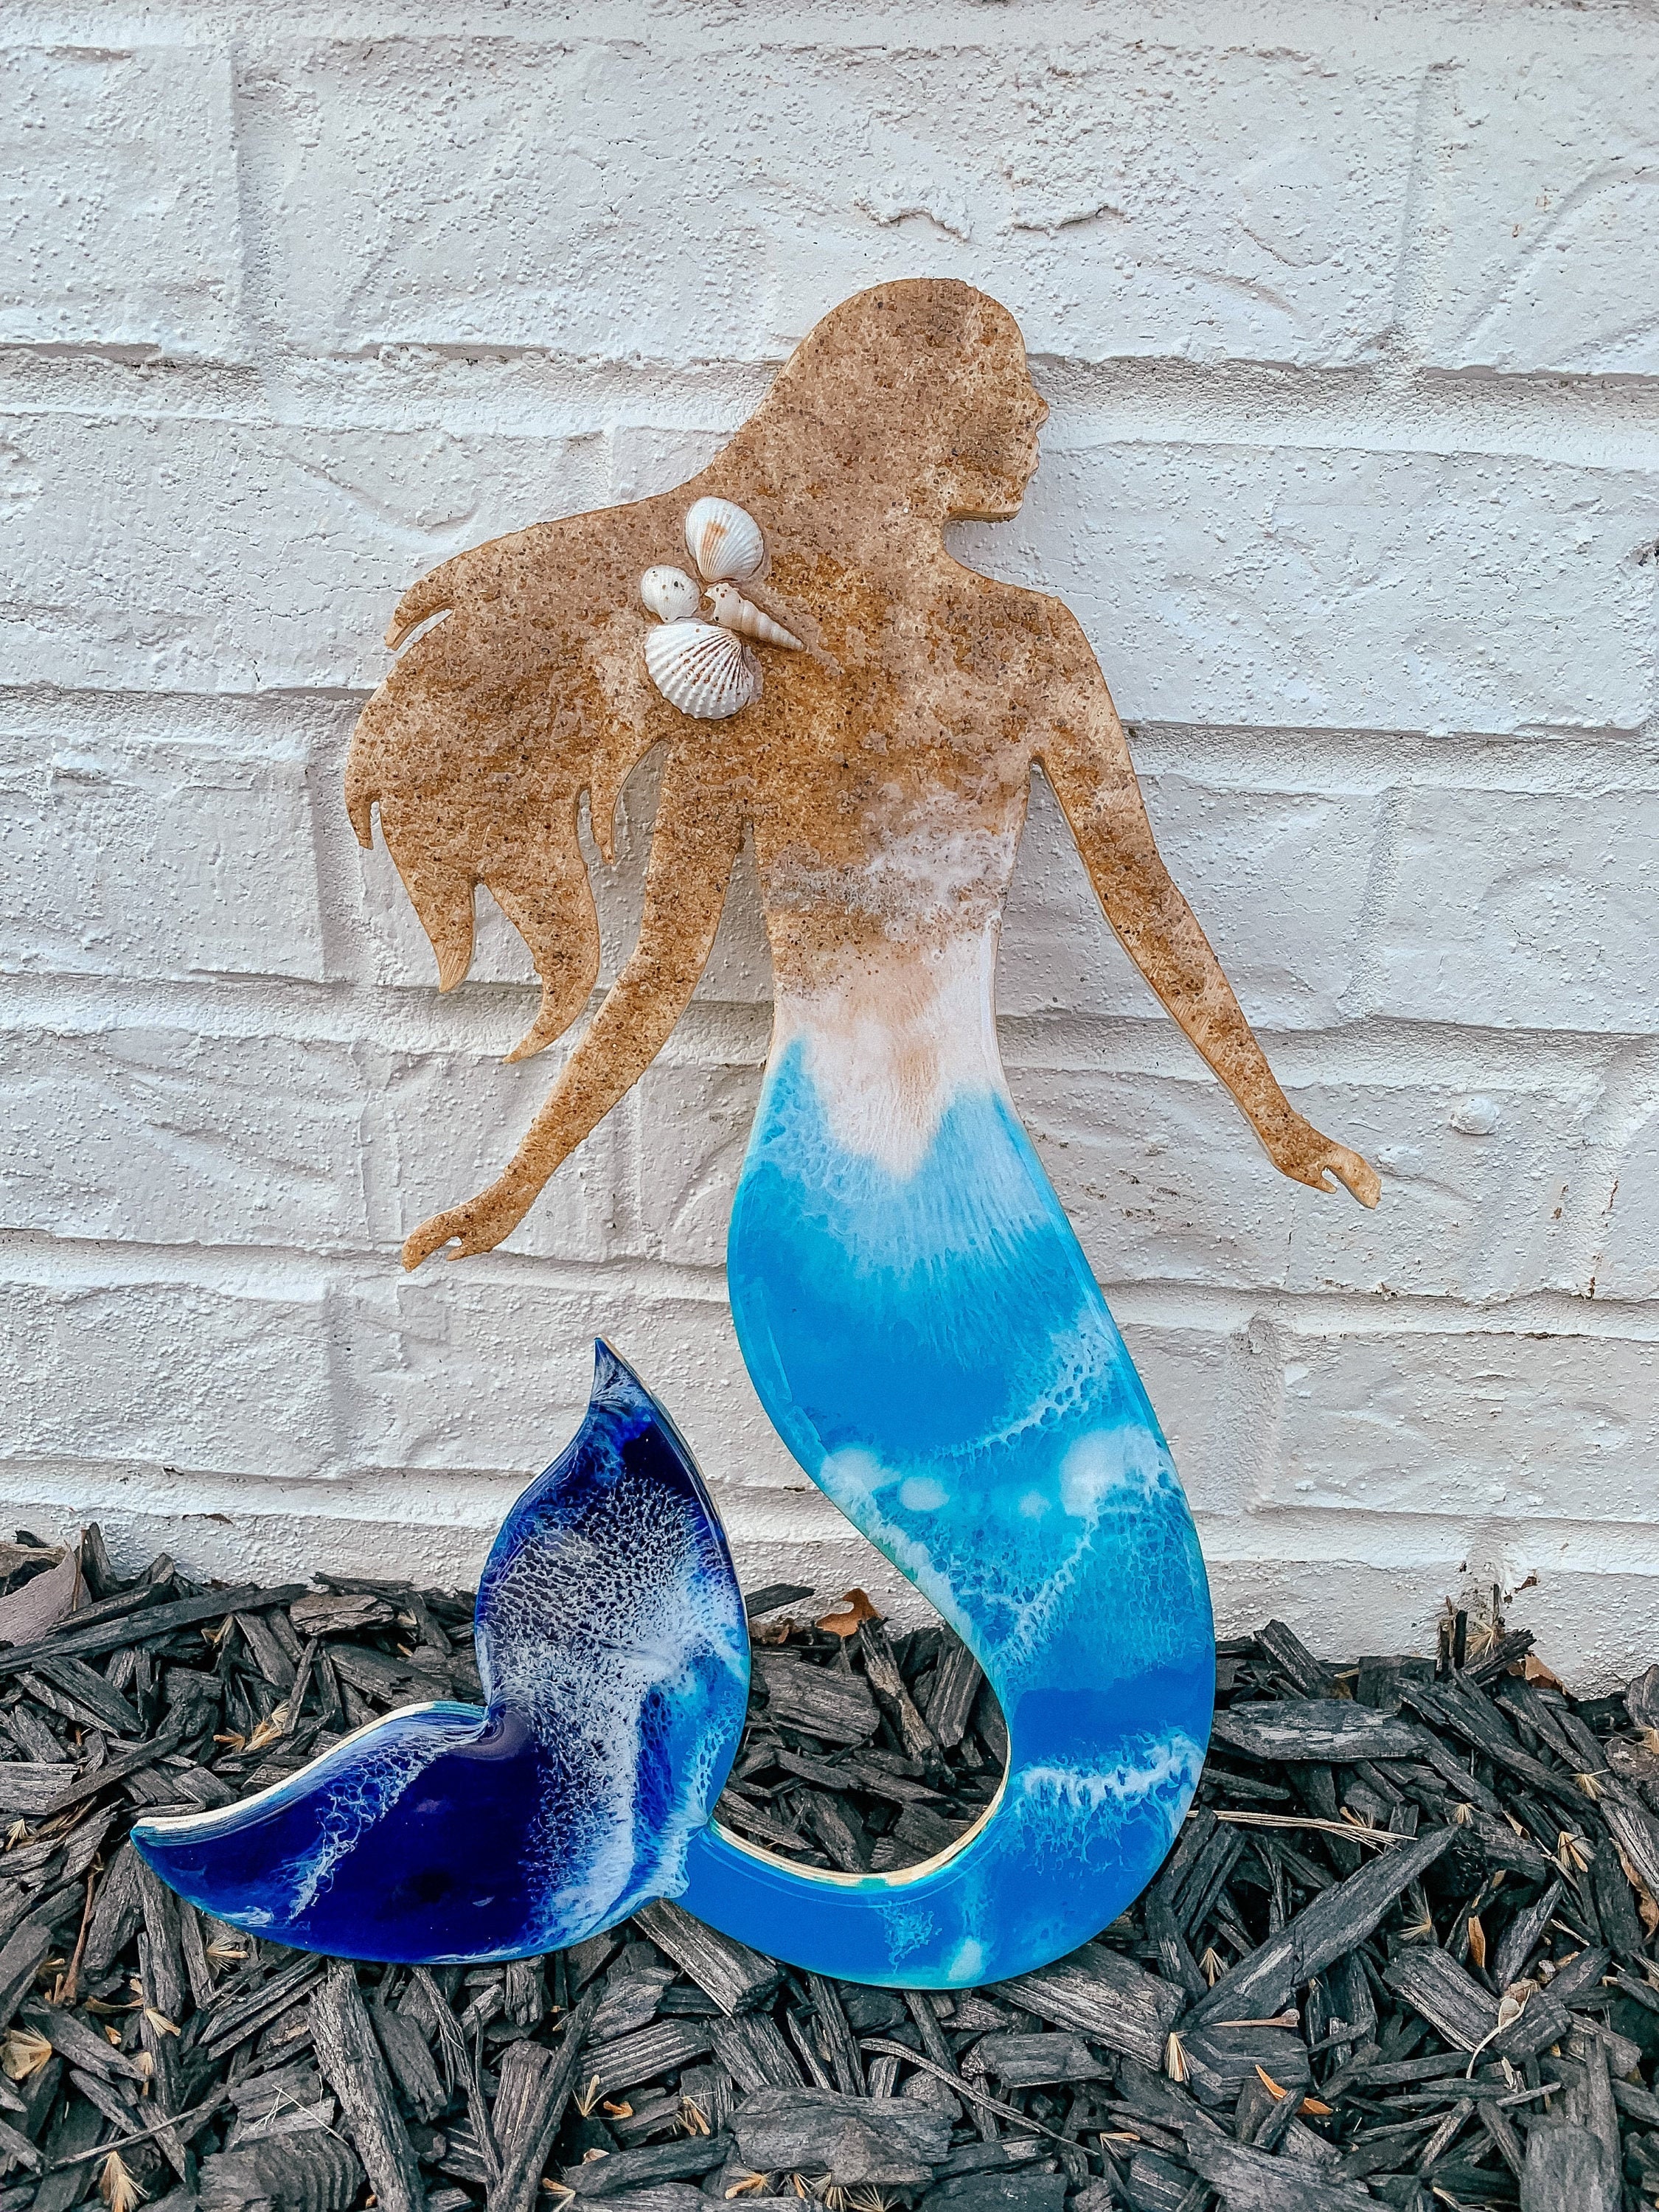 Kit, Do It Yourself DIY Resin Art Kit, Sea Glass Picture, Shell Art,  Crafting Gift, Home Crafting. Craft Kits. Mermaid Tail. 